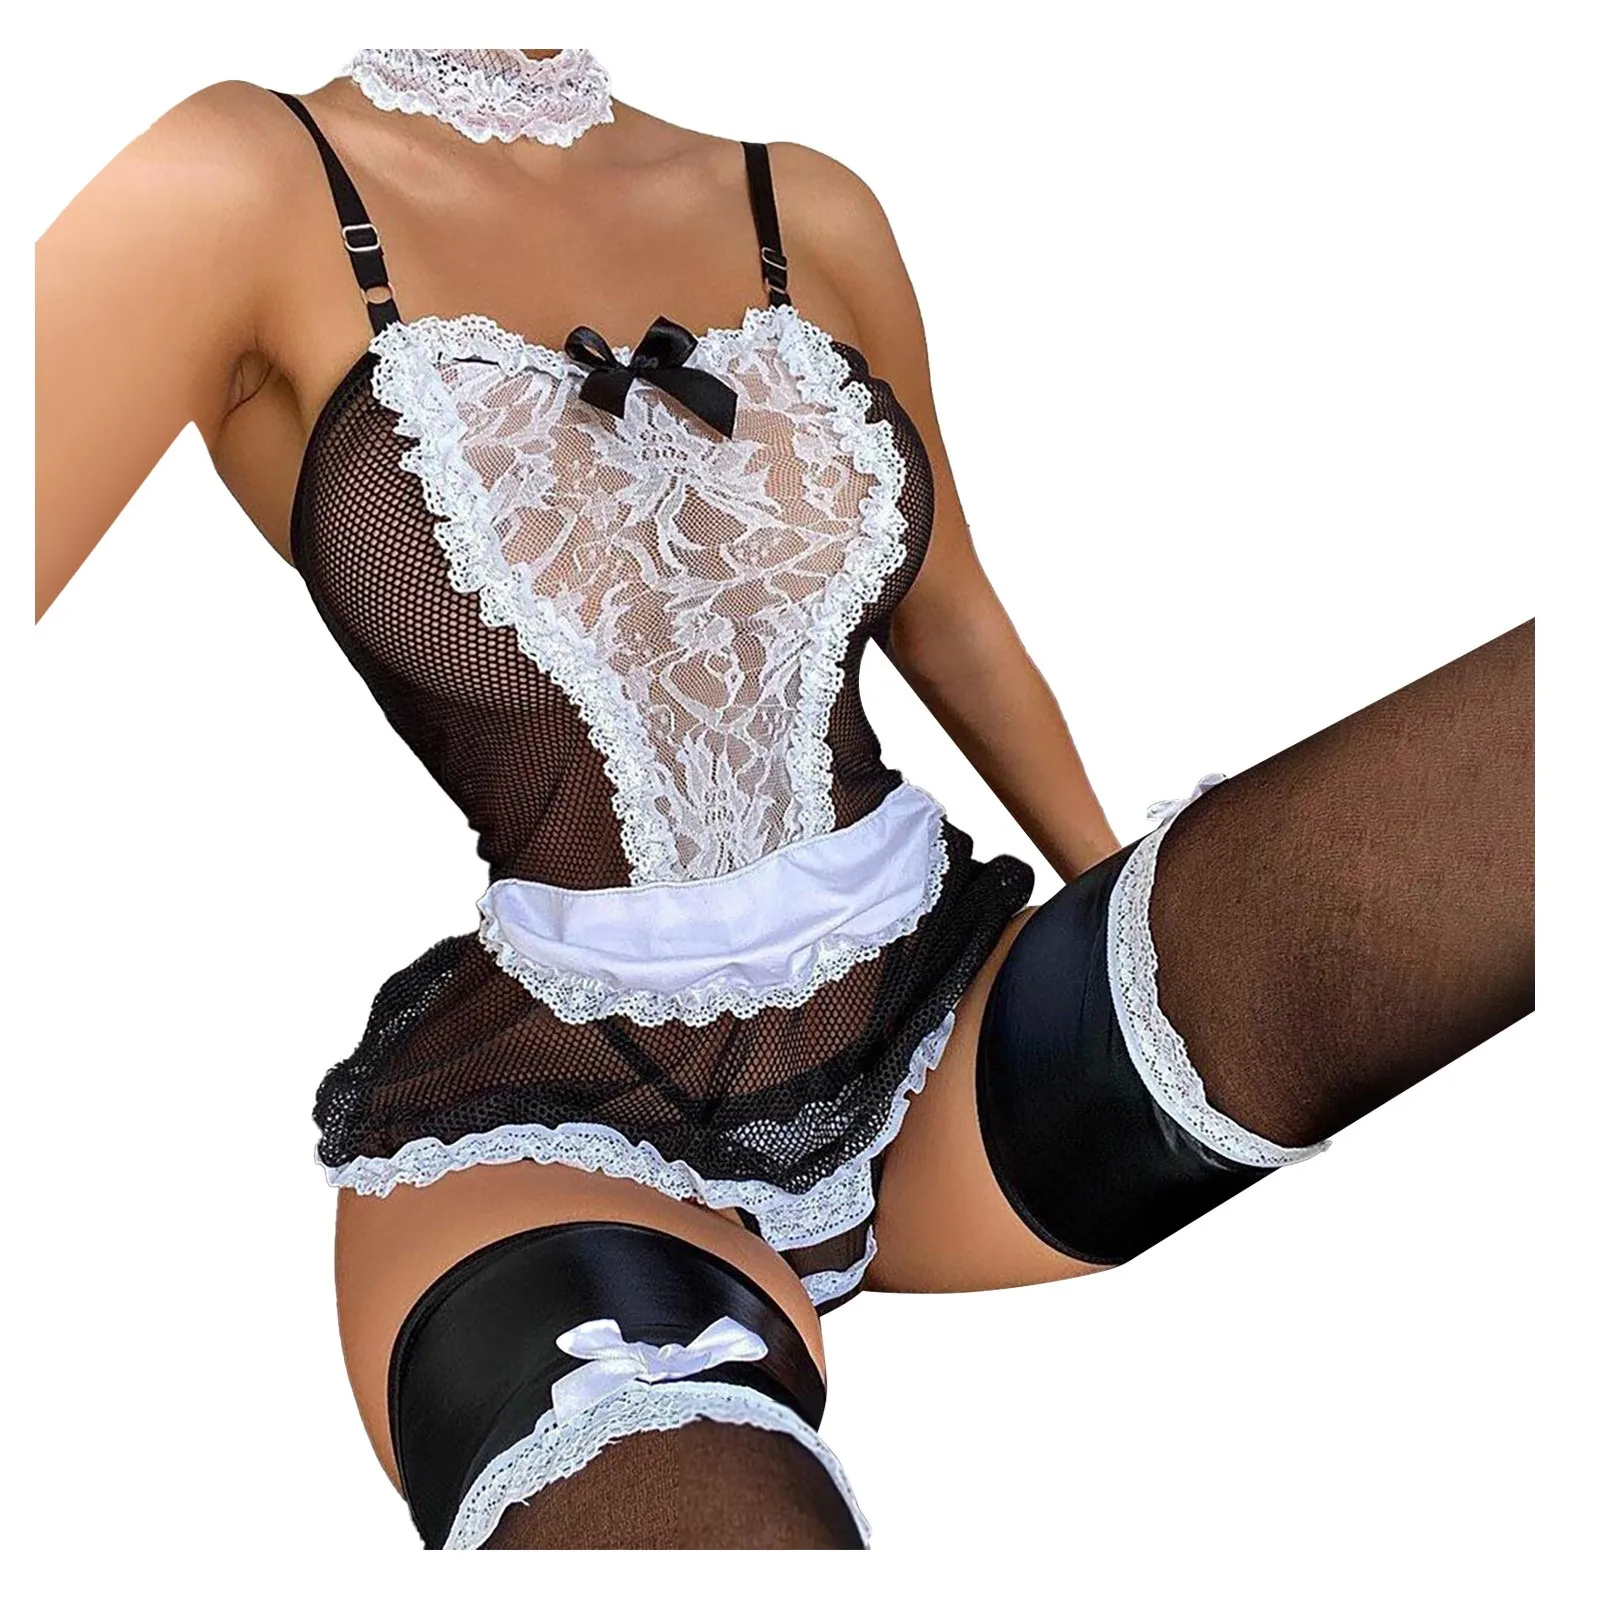 Bra Sets Women's Sexy Lingerie Embroidery Sexy Ladies Underwear Sensual Lingerie Woman Clothes Erotic Exotic Set Hot Intimates plus size underwear sets